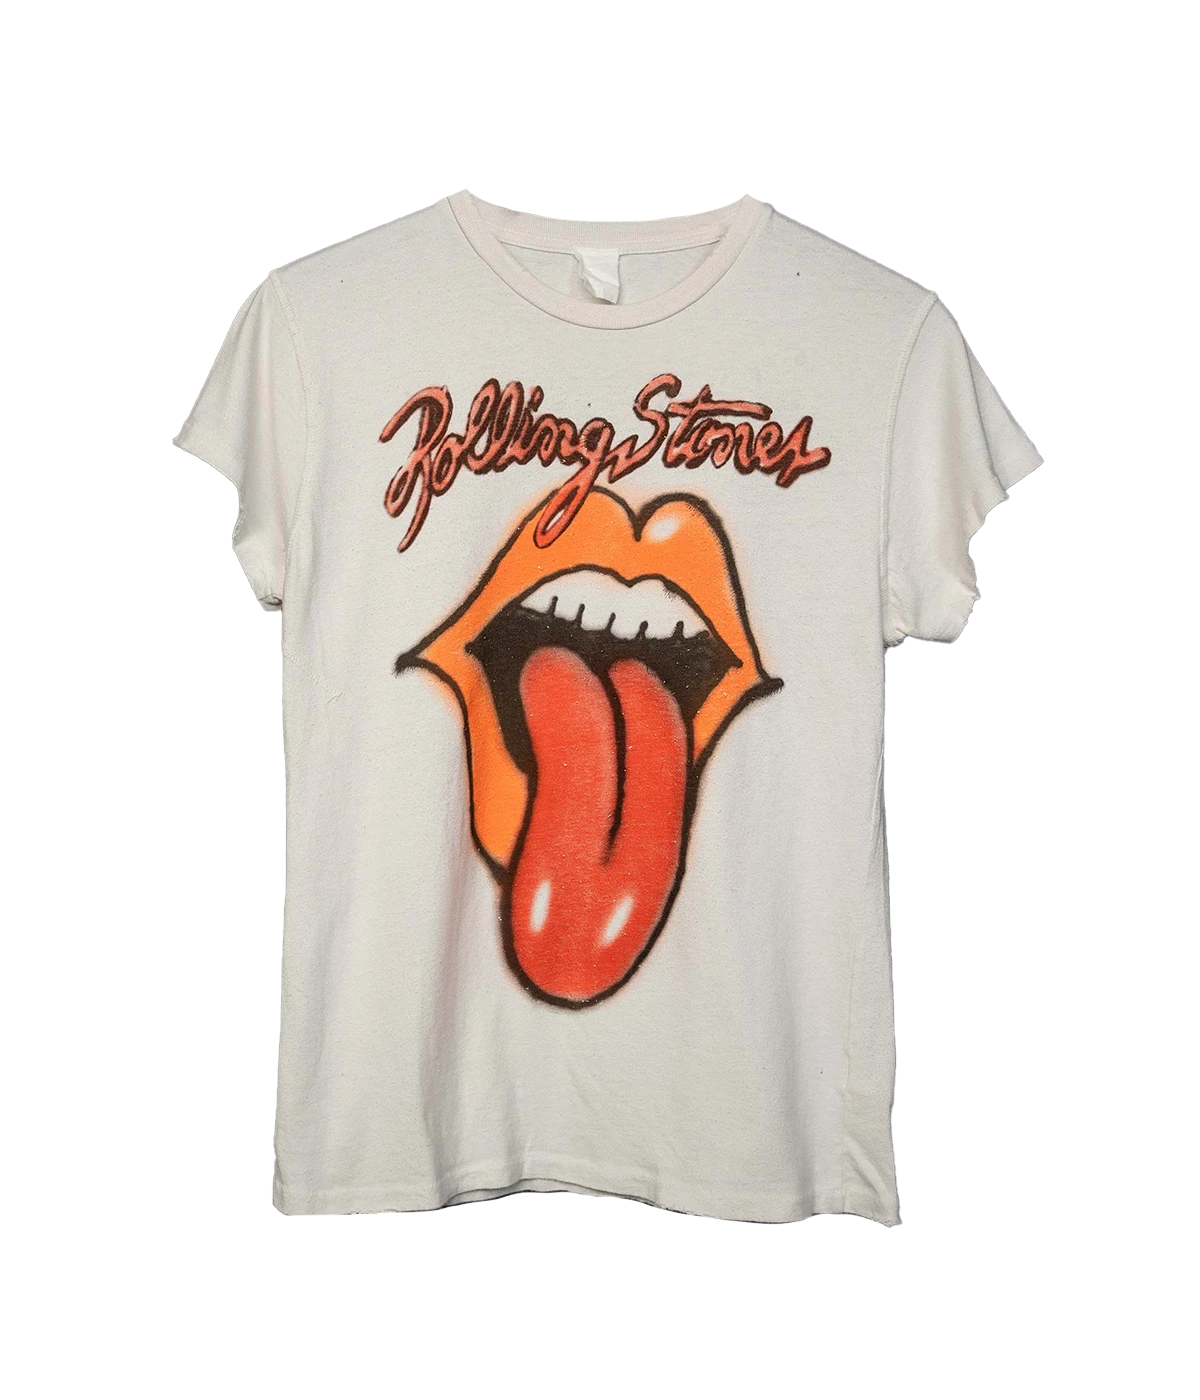 Rolling Stones Airbrushed T-Shirt in White